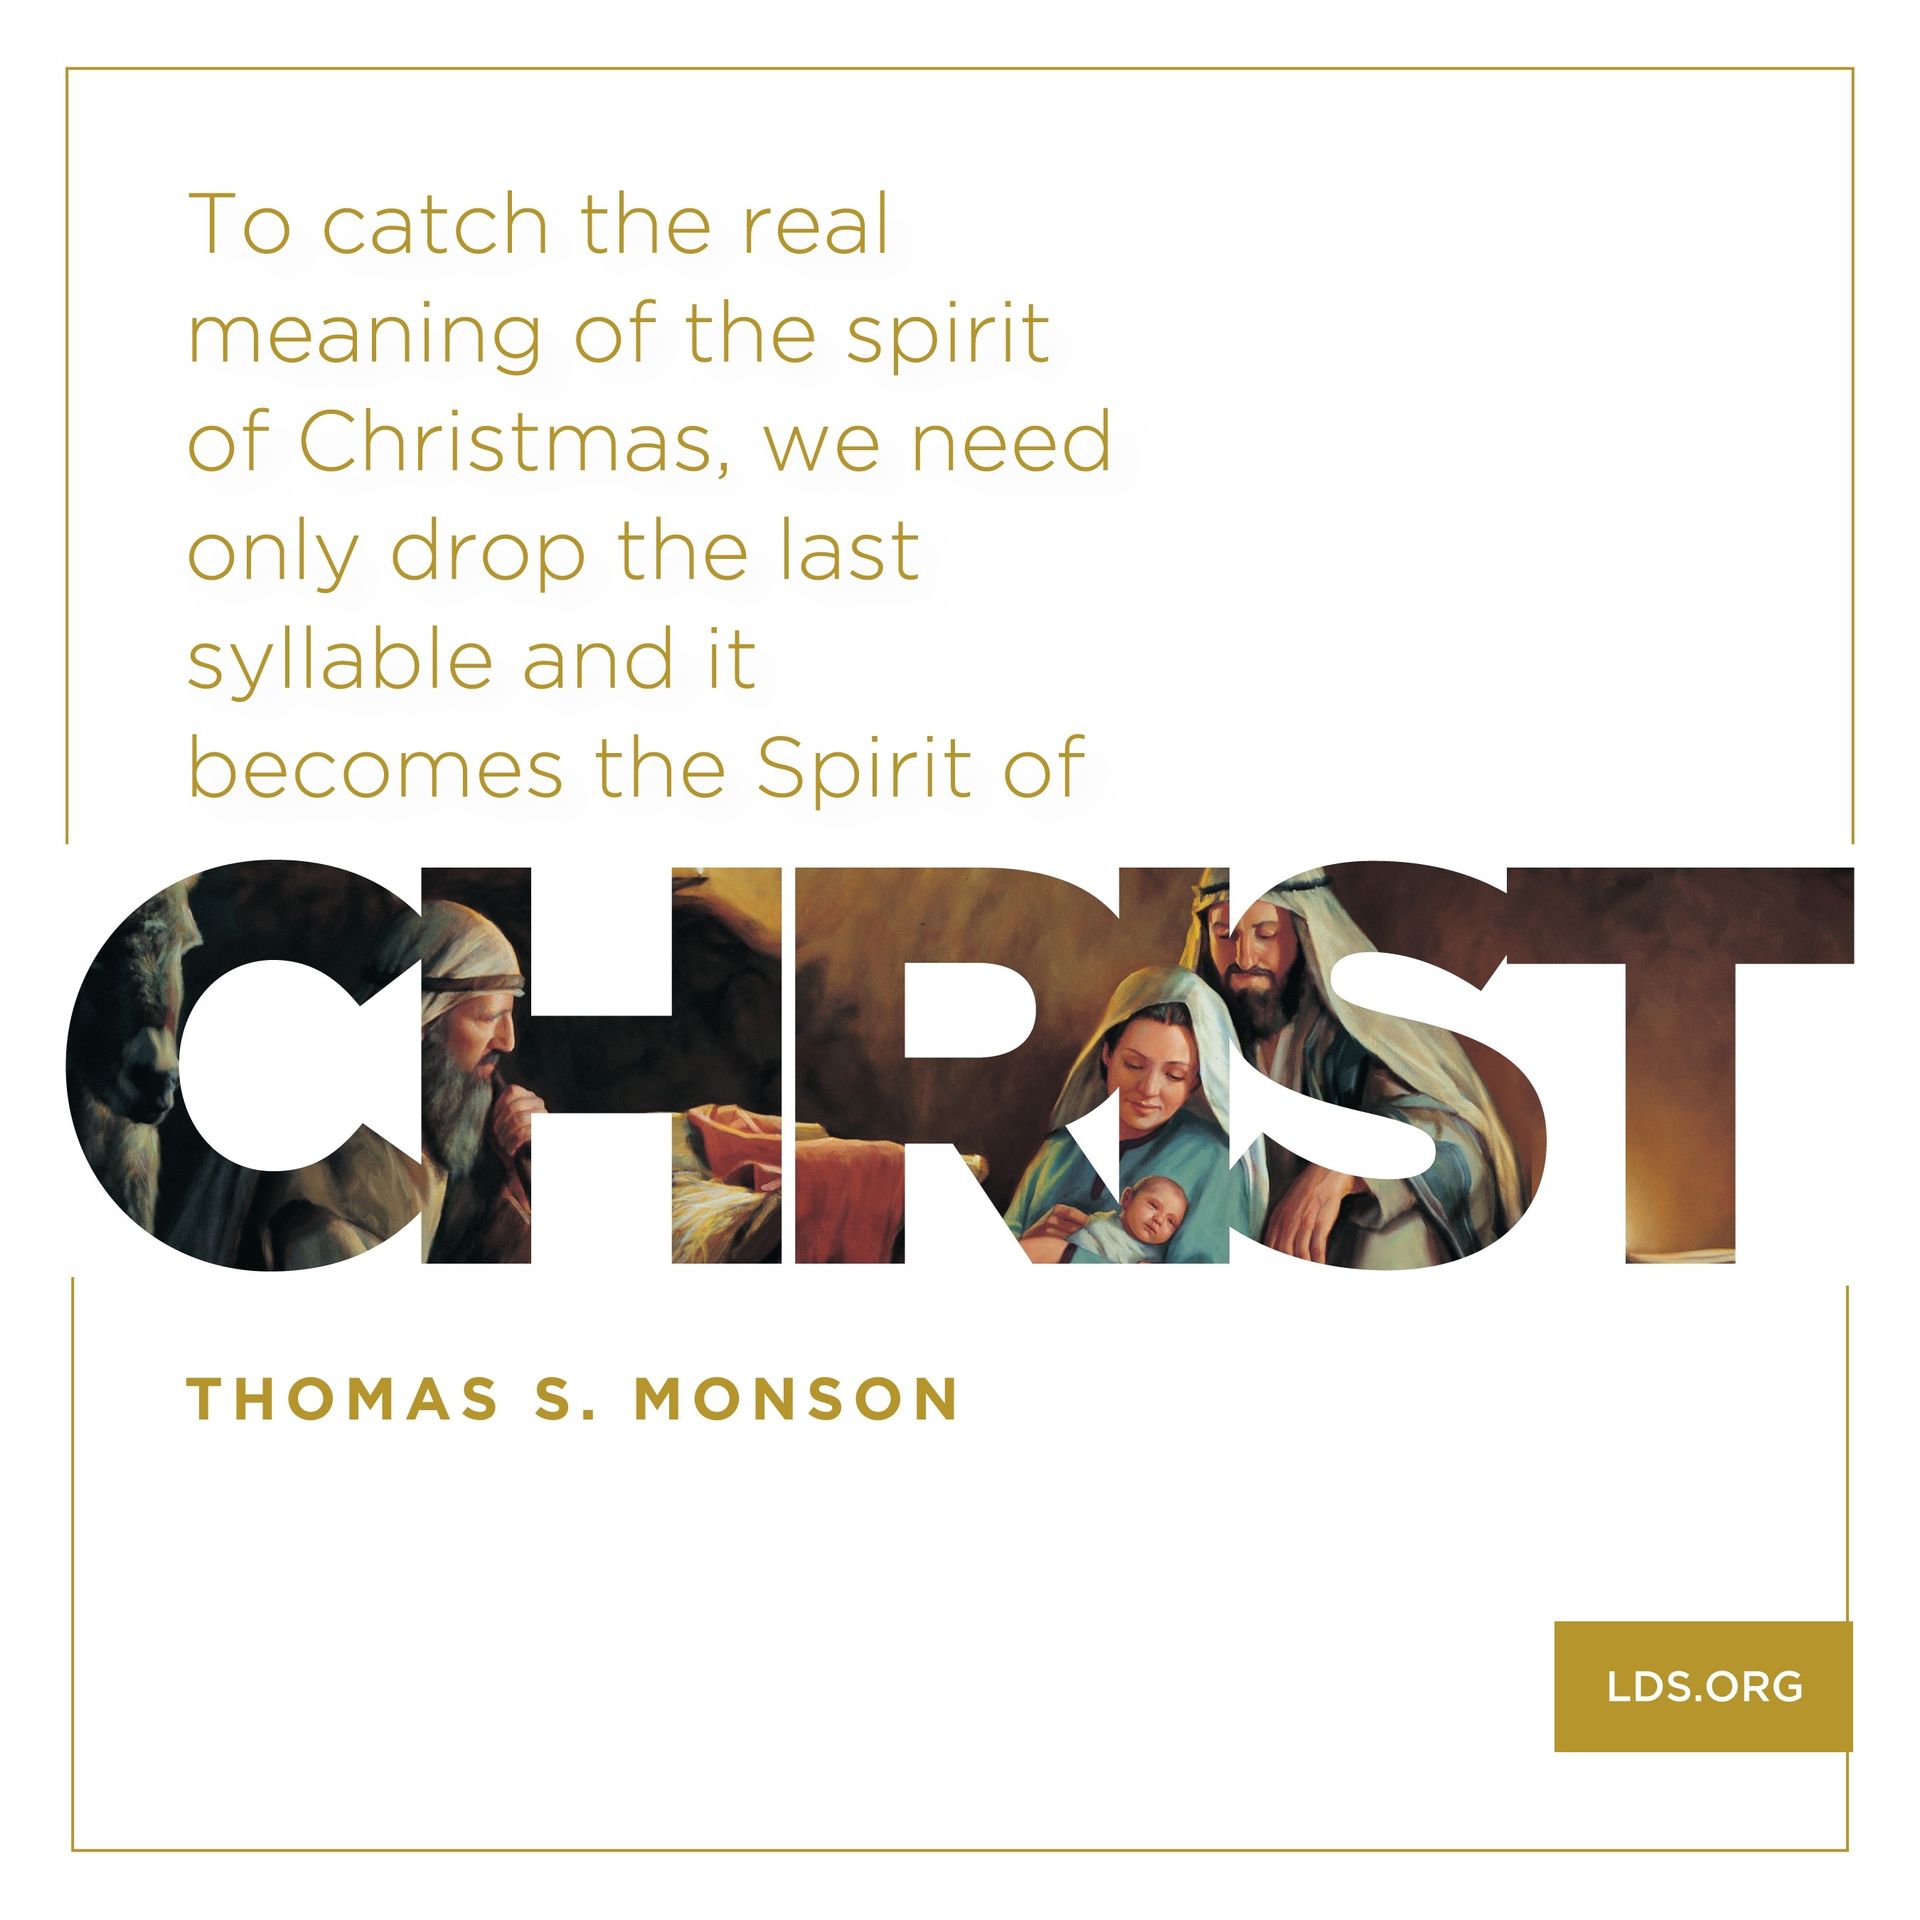 “To catch the real meaning of the spirit of Christmas, we need only drop the last syllable and it becomes the Spirit of Christ.”—President Thomas S. Monson, “The Real Joy of Christmas” © undefined ipCode 1.